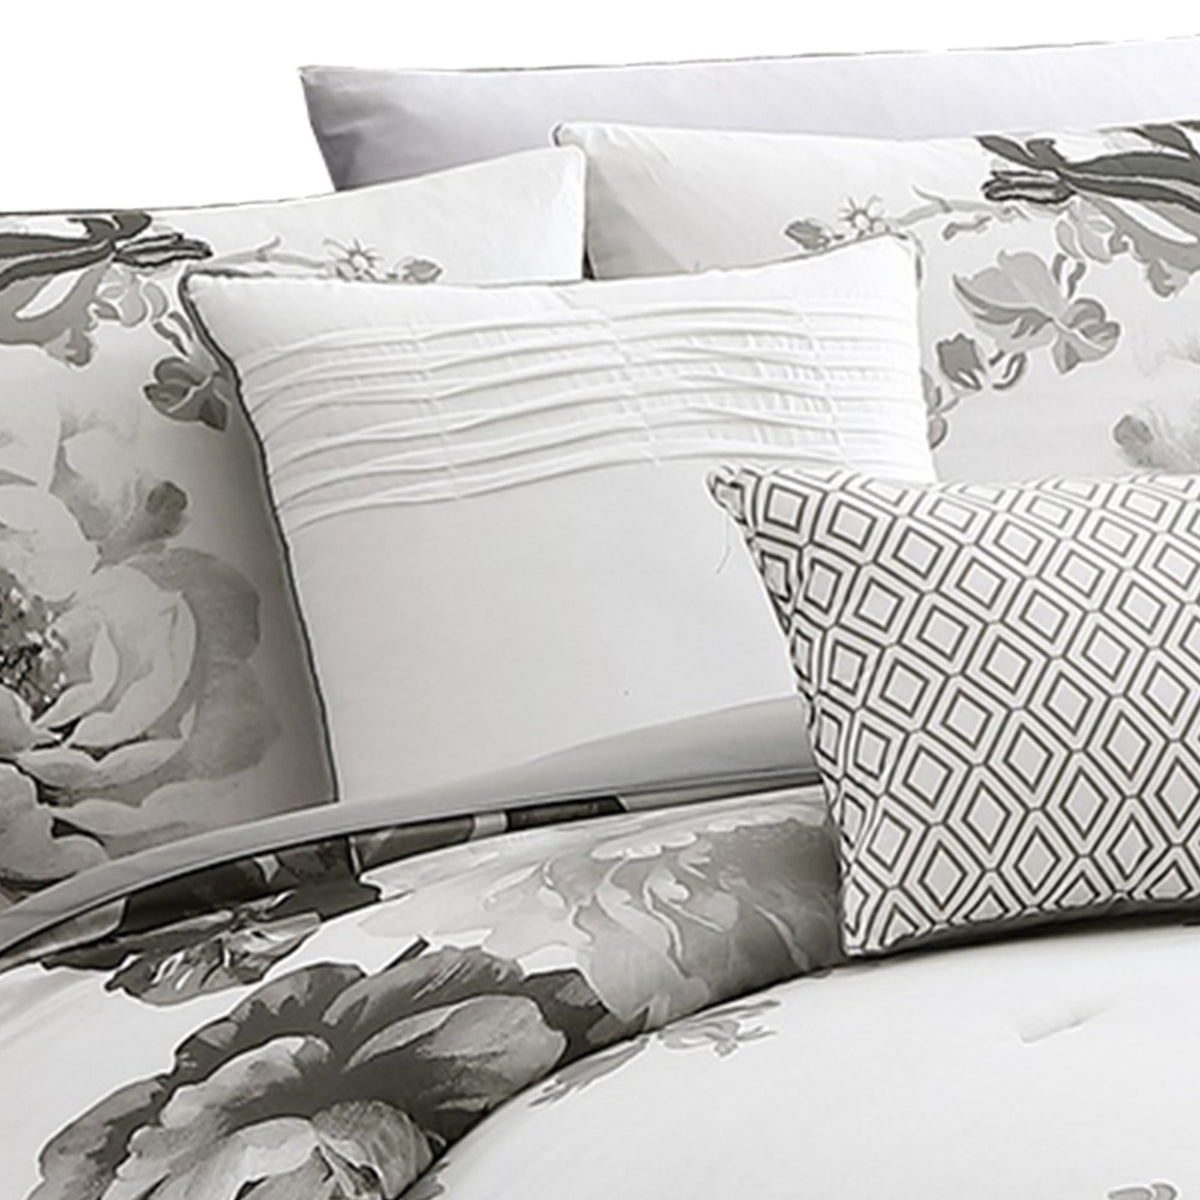 7 Piece Cotton King Comforter Set with Floral Print, Gray and White - BM225191